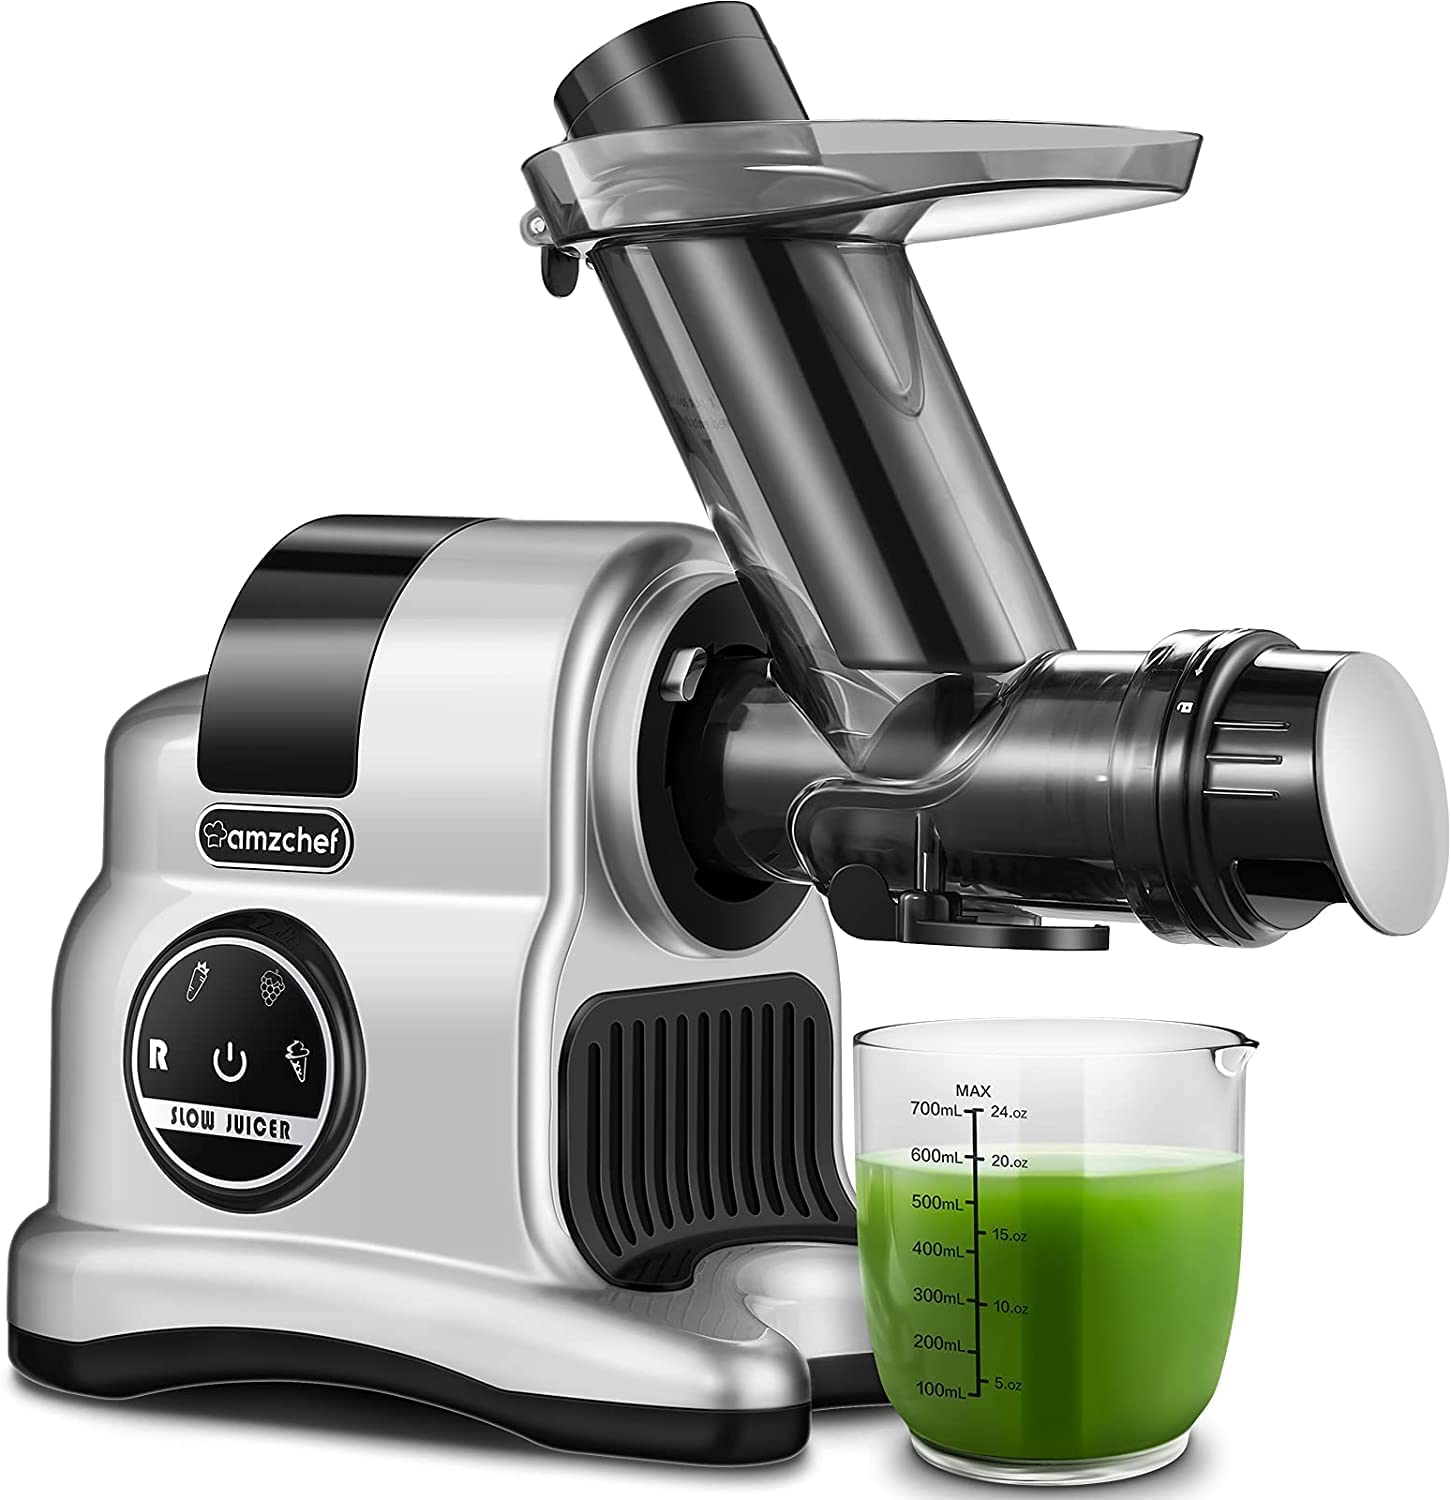 PURE Juicer - Innovation In Cold-Press Juicing 